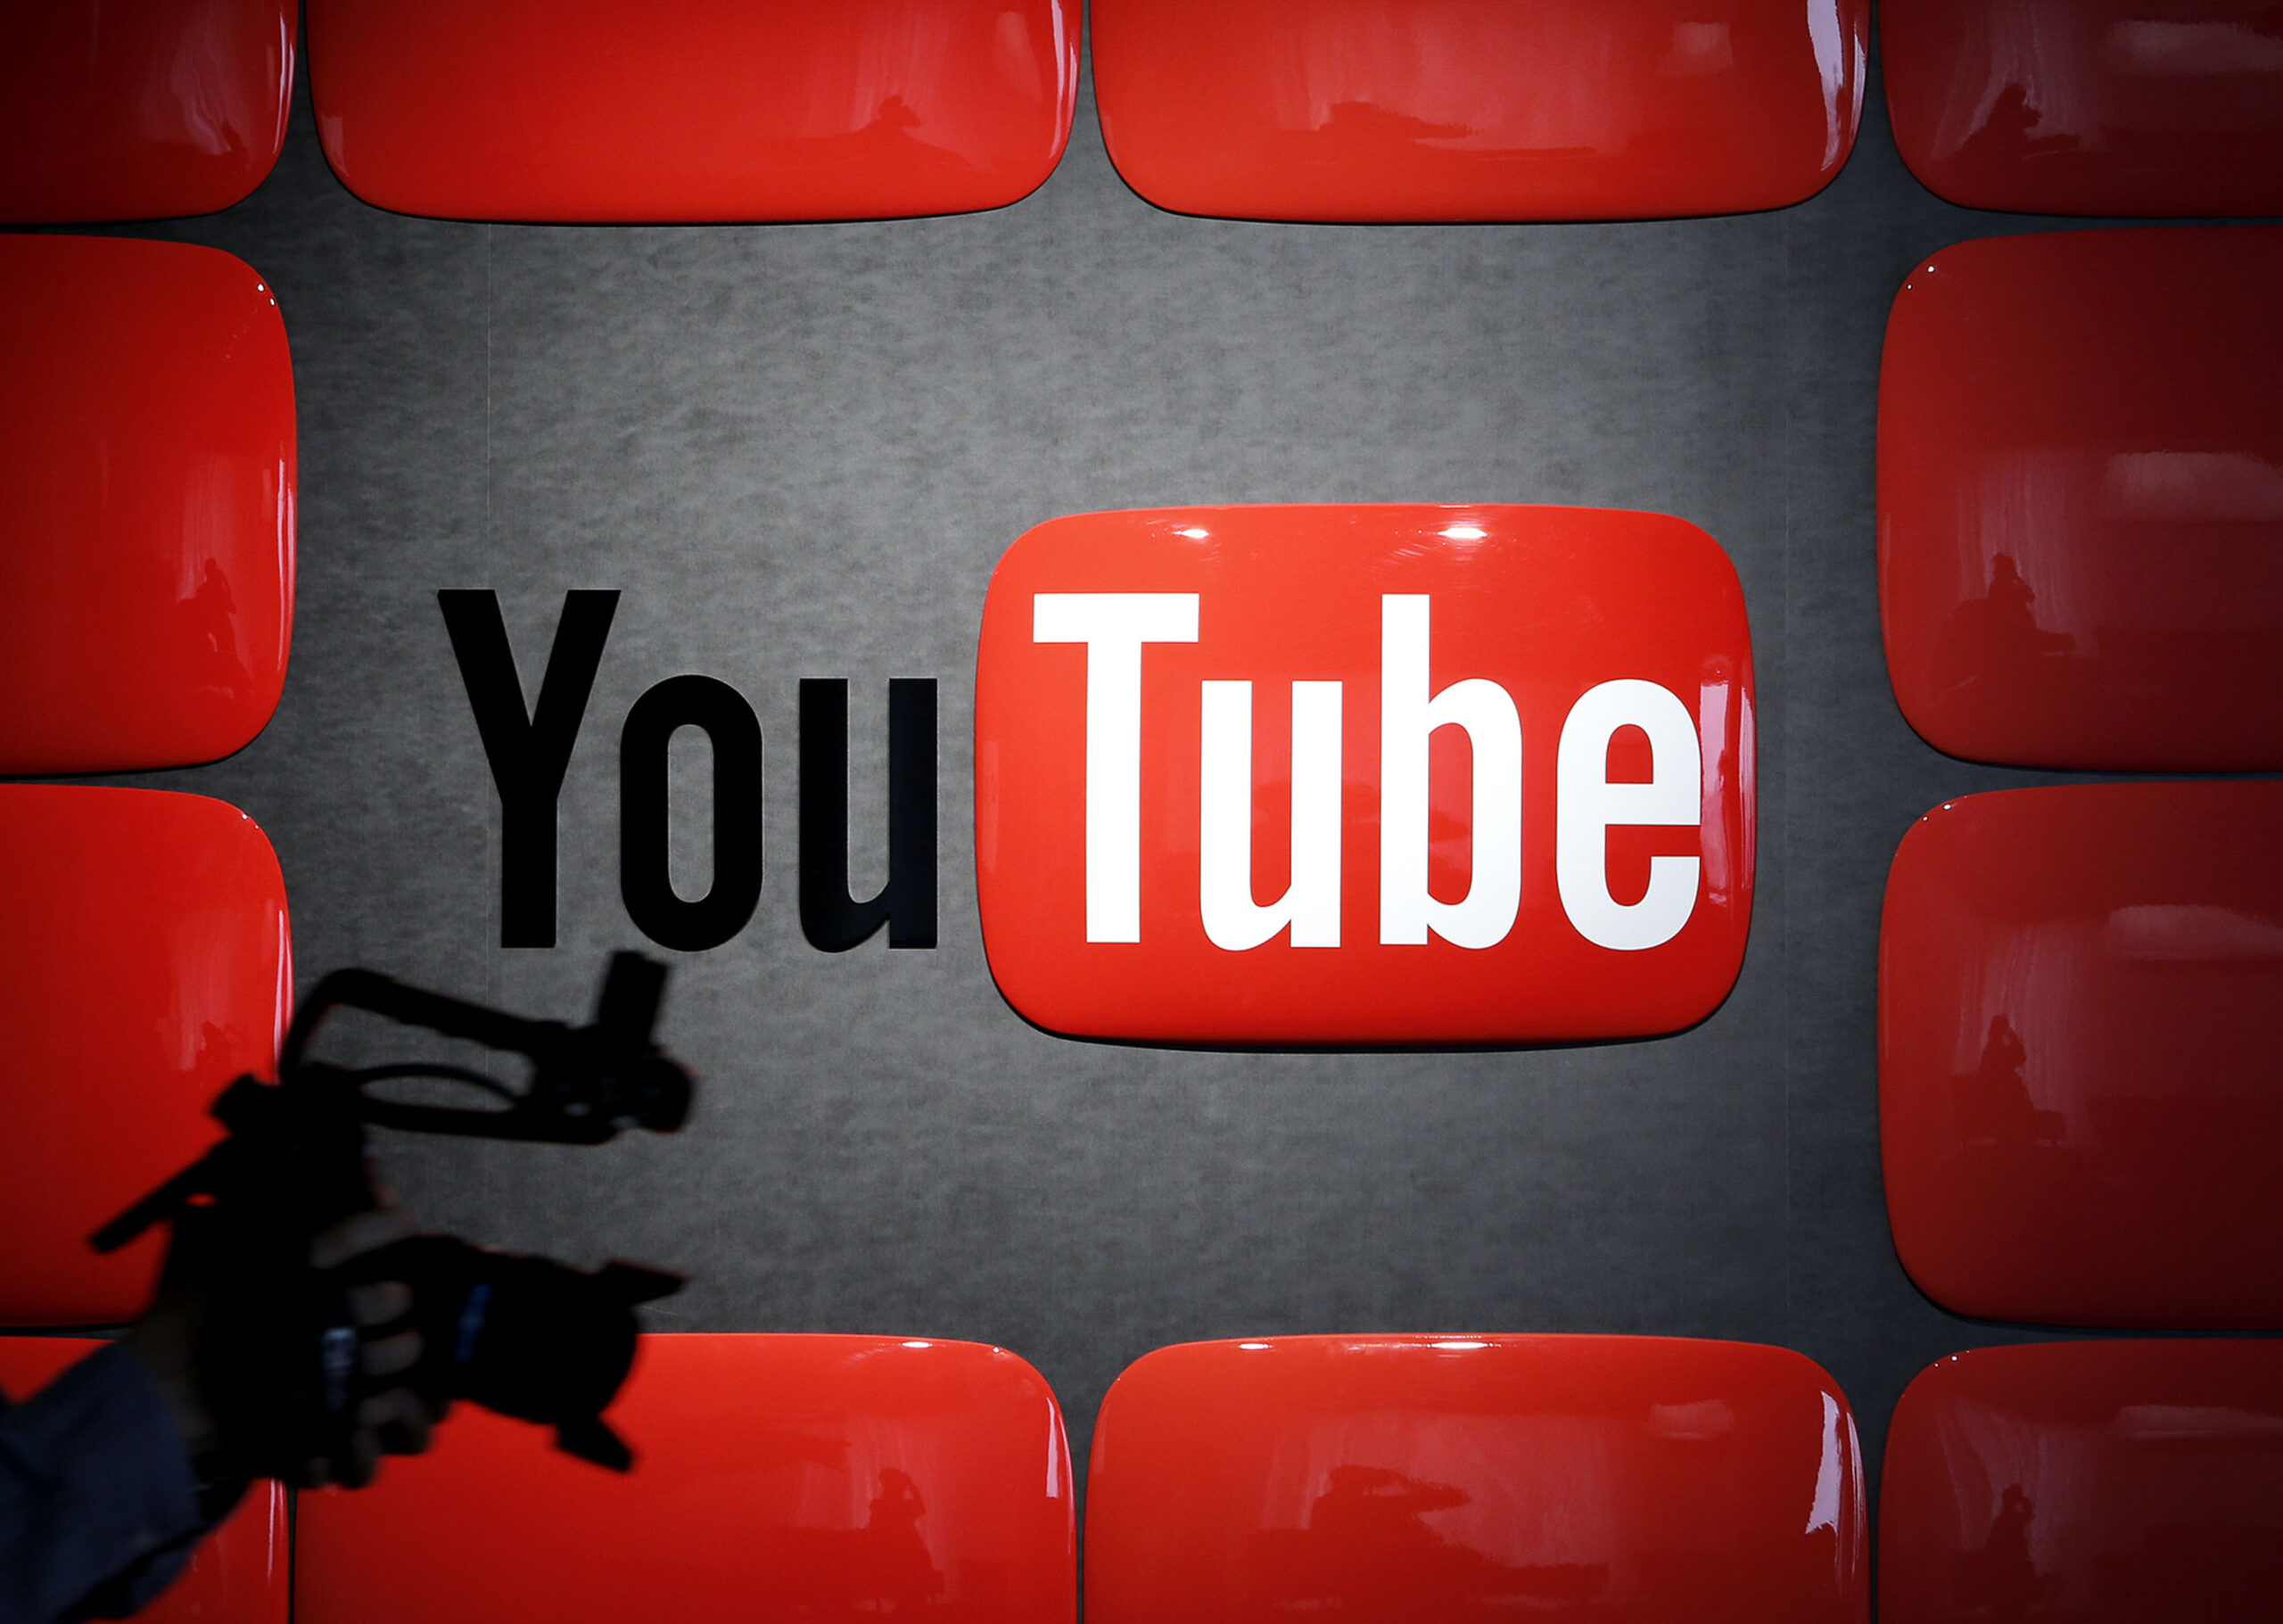 Breaking Down the Myth How YouTube's Watch Habits Shape Our Views, Not Algorithms---